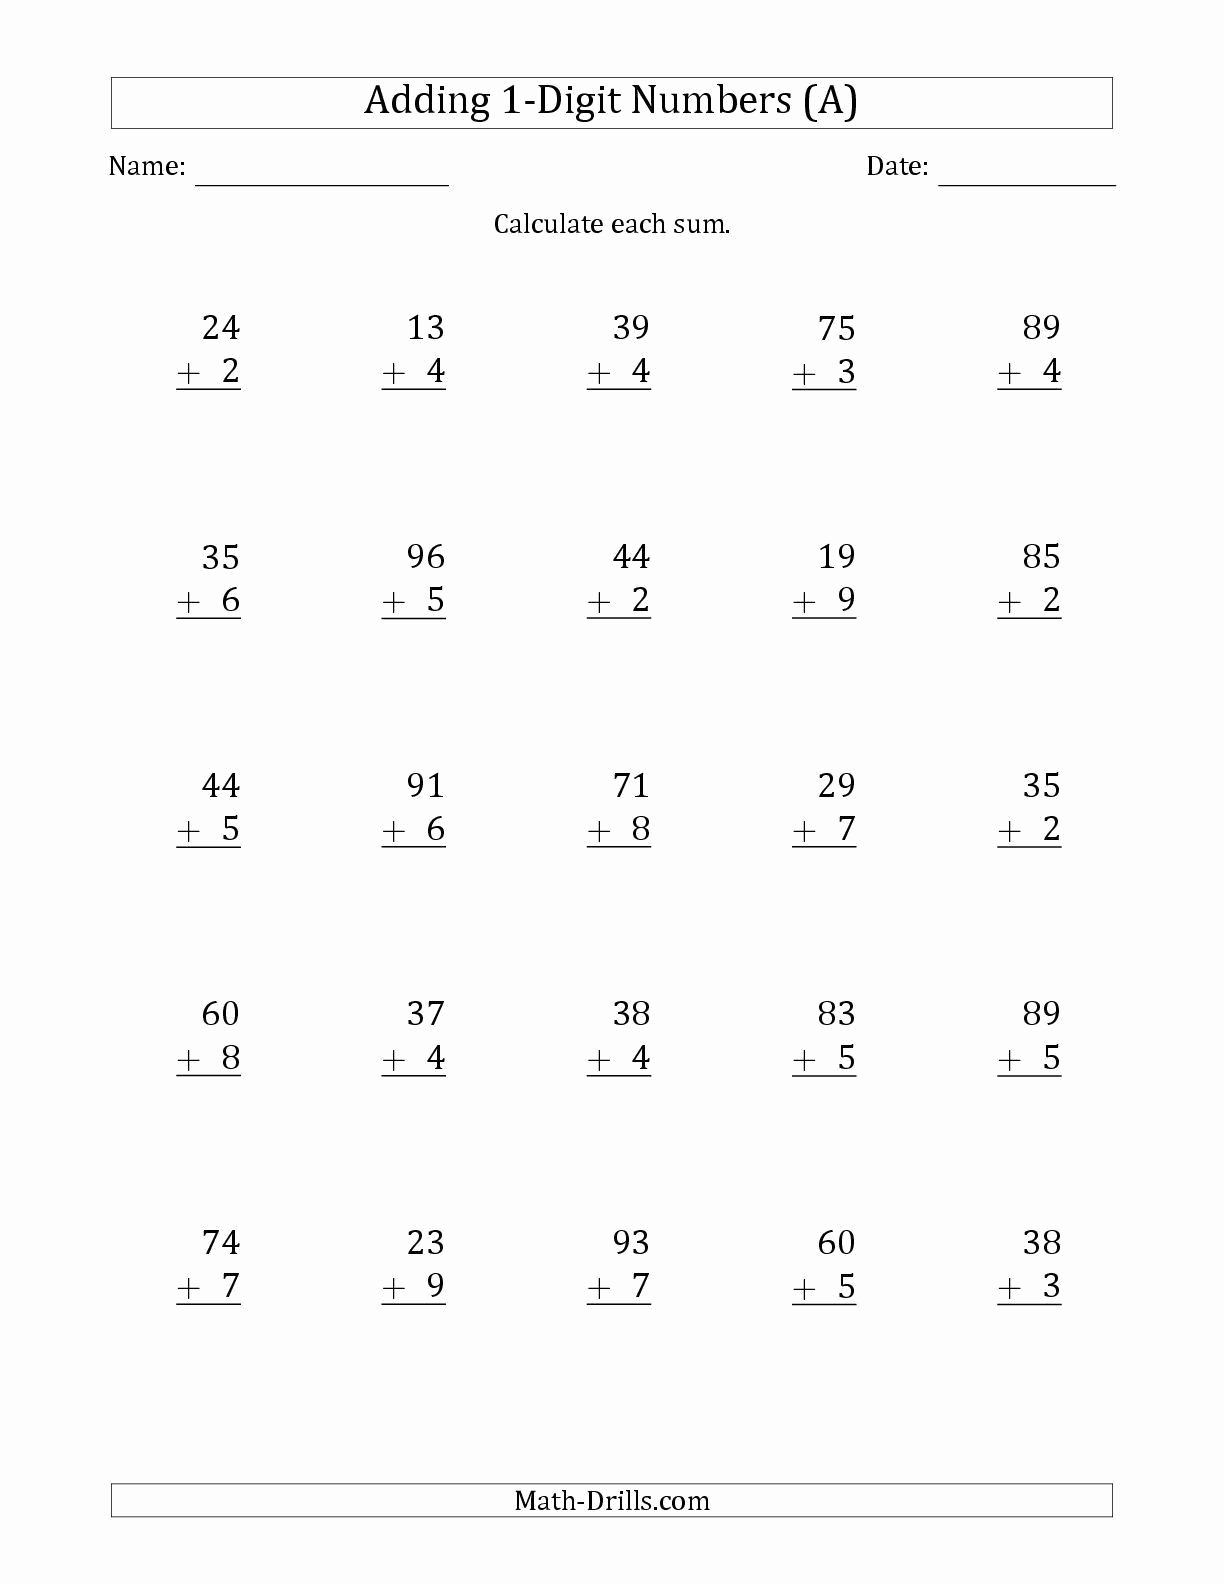 Russian Math Worksheets Luxury Russian School Math Worksheets Simple Template Design